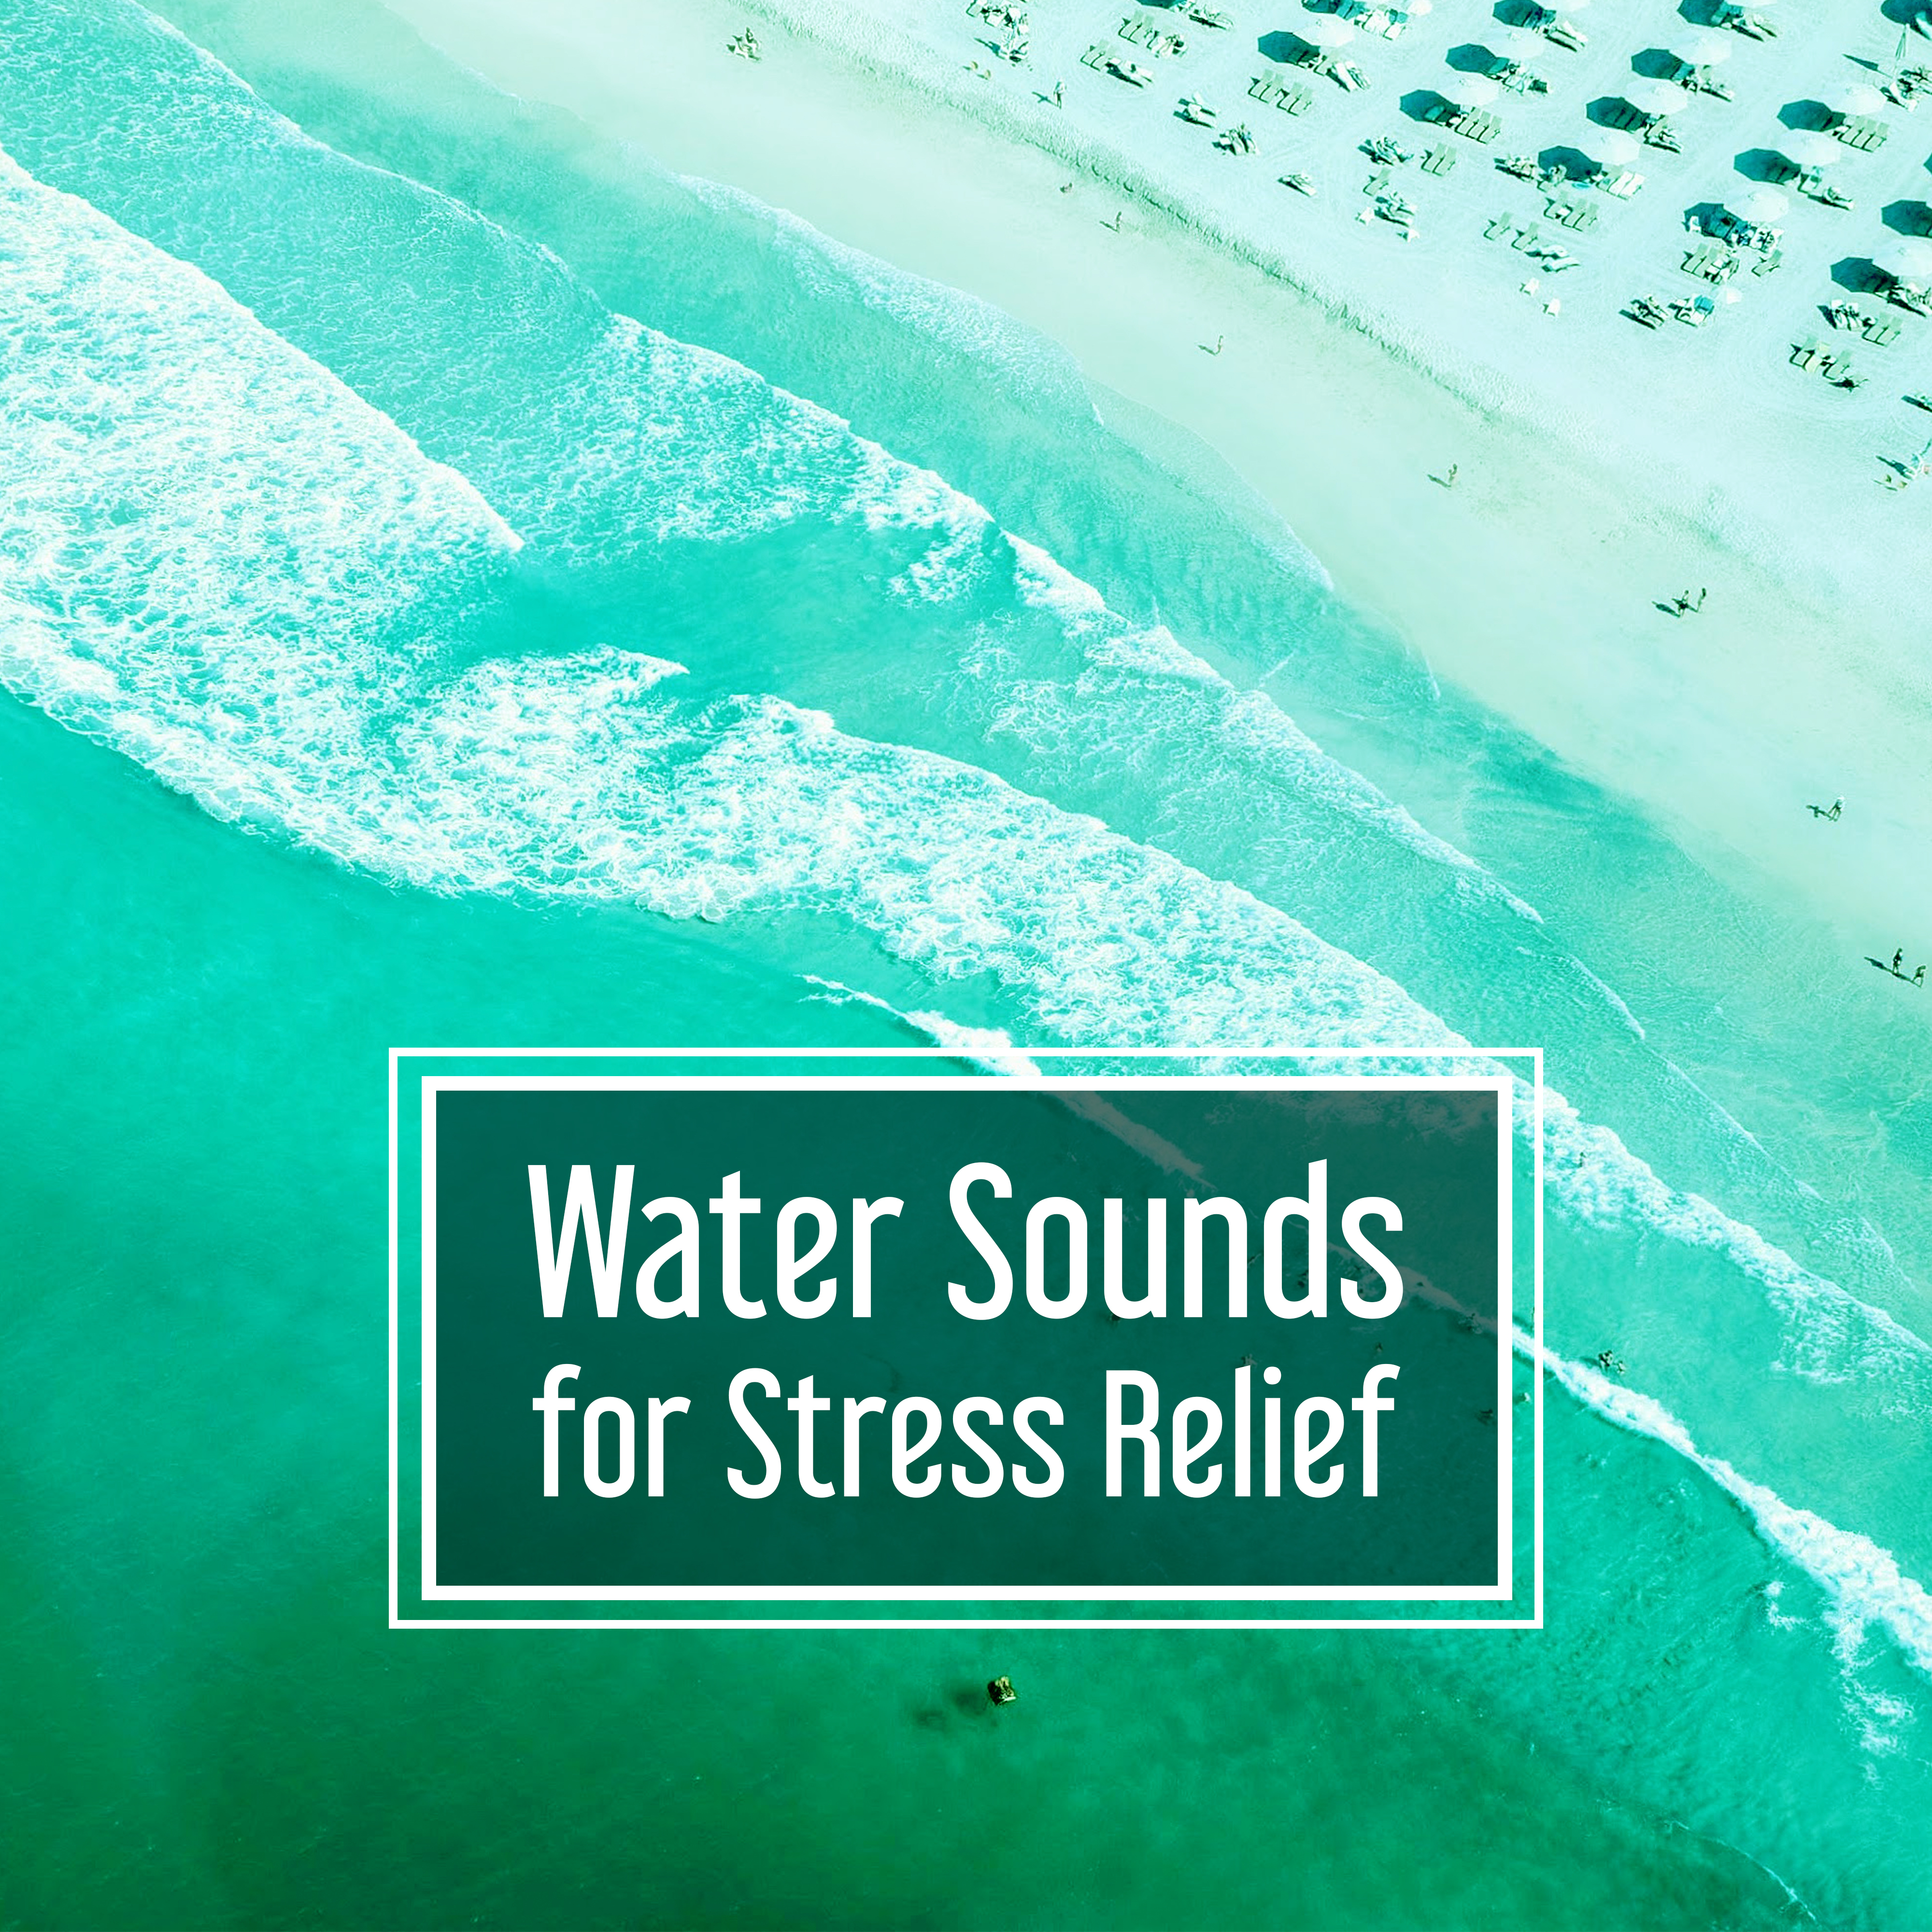 Water Sounds for Stress Relief  Easy Listening, Water Relaxation, Smooth Sounds, Calm Music, Nature Sounds